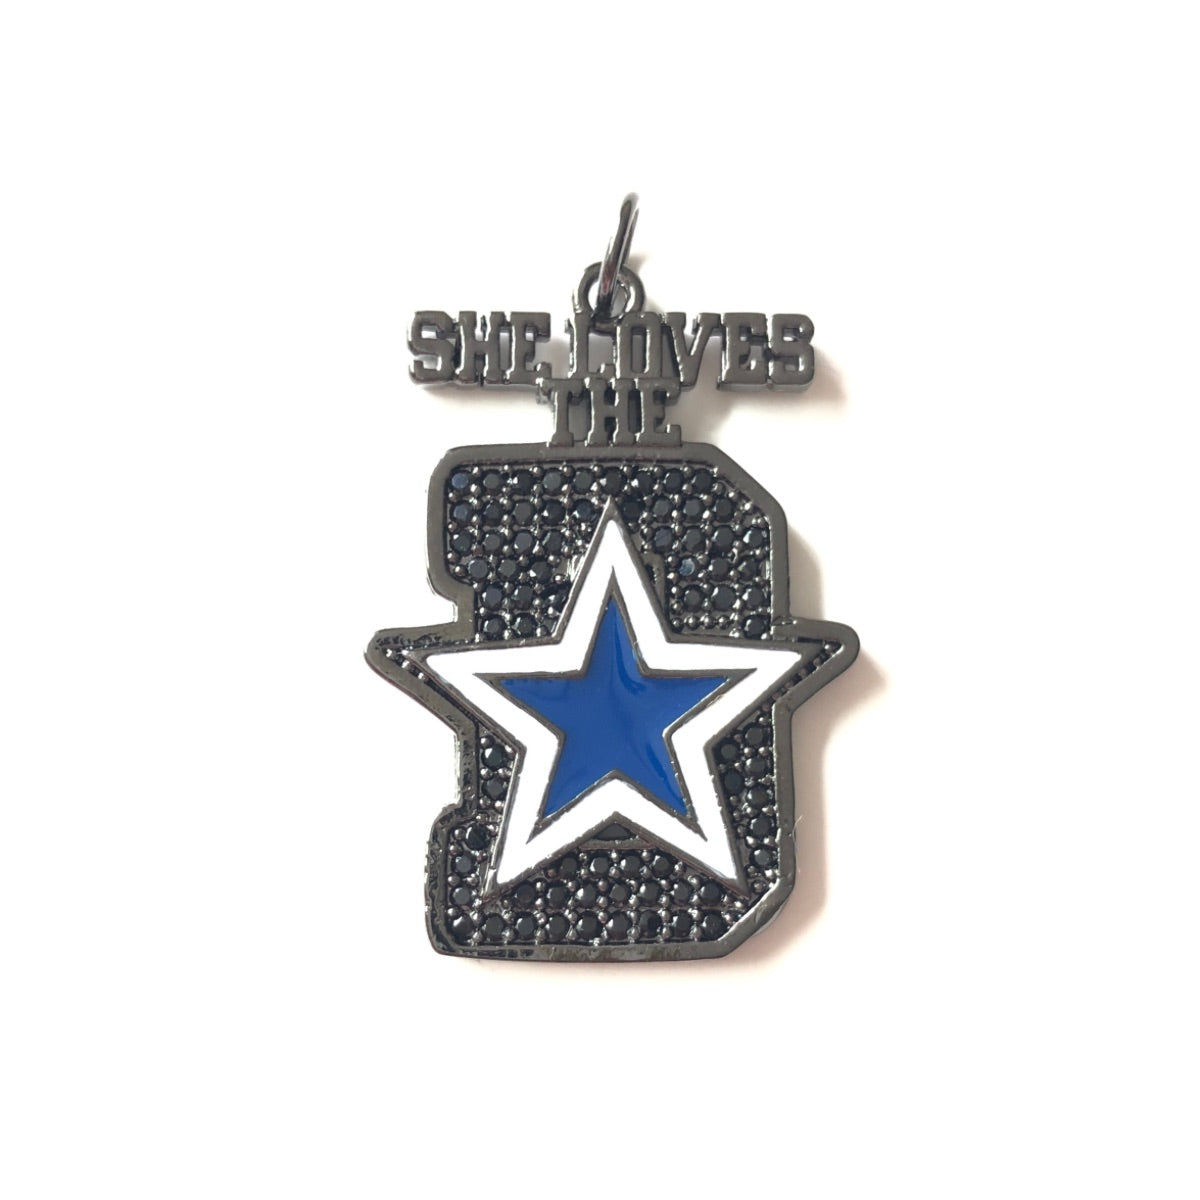 10pcs/lot 35*25mm Cowboys Star CZ Paved She Loves The D Word Charms Black on Black CZ Paved Charms American Football Sports New Charms Arrivals Charms Beads Beyond